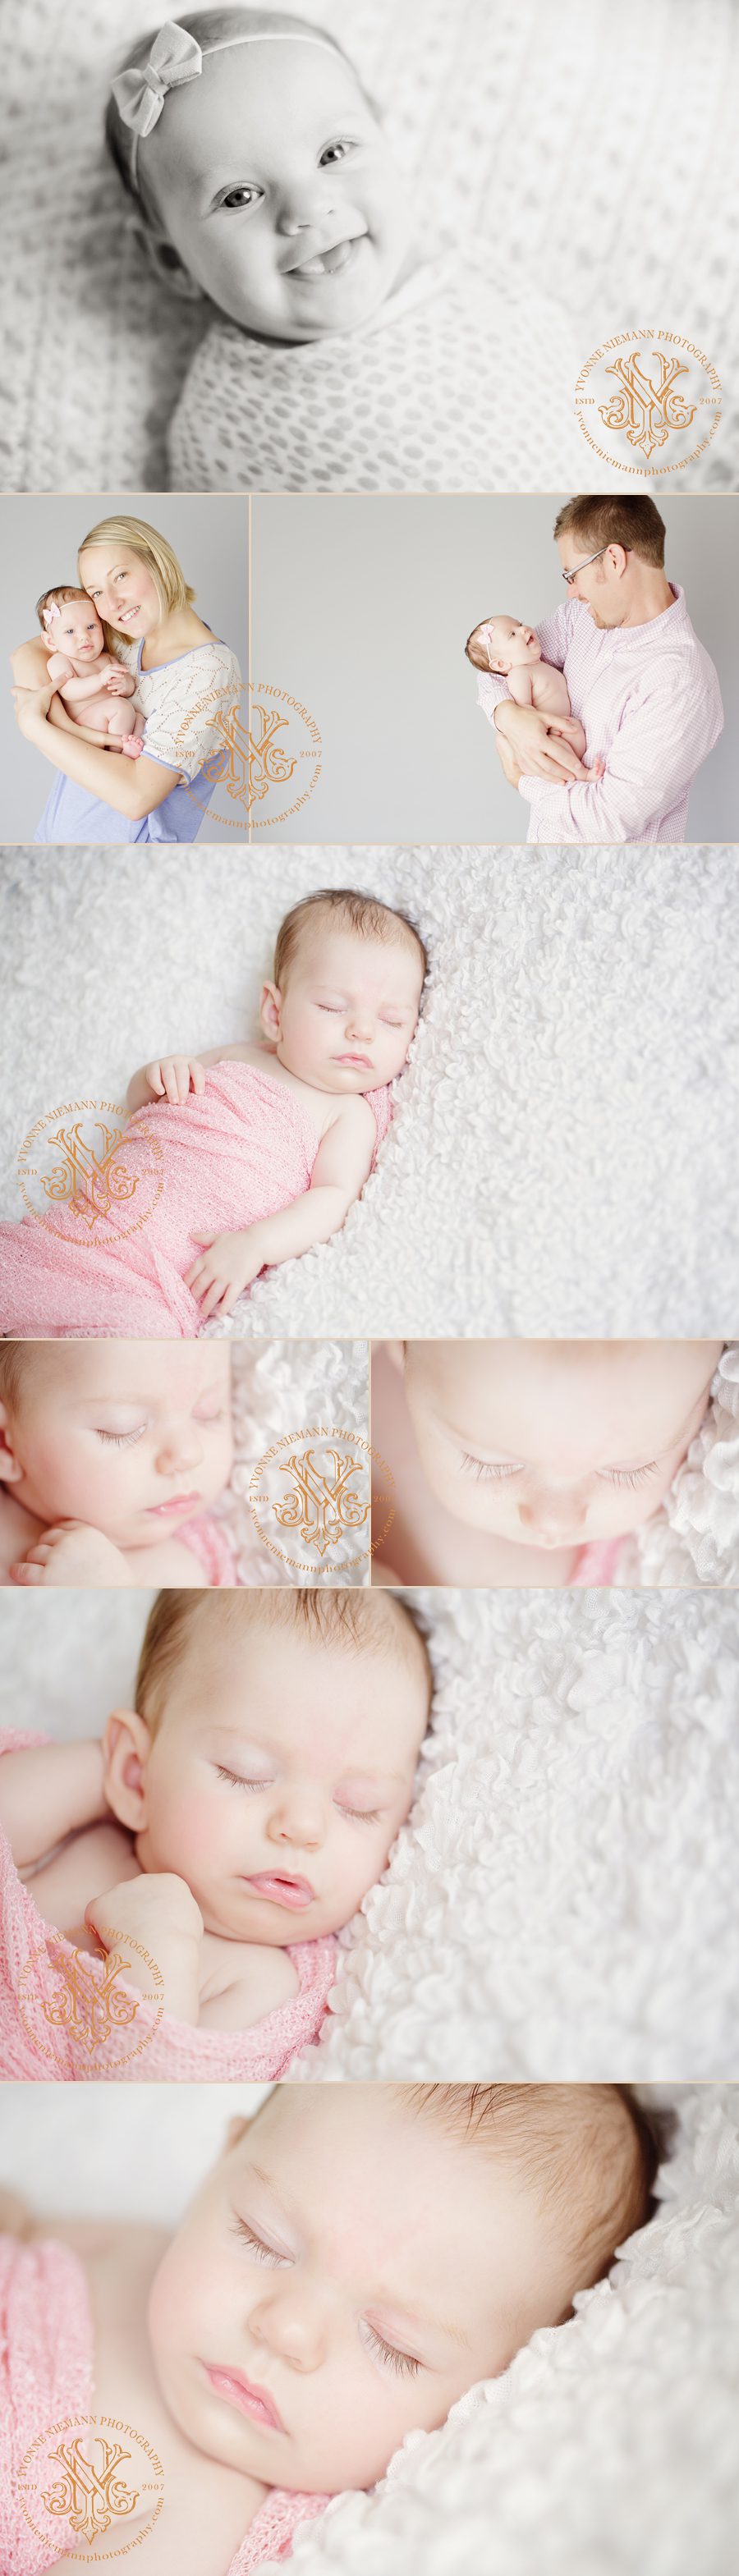 Portraits of a nine week old infant girl taken by Yvonne Niemann Photography in St. Louis.